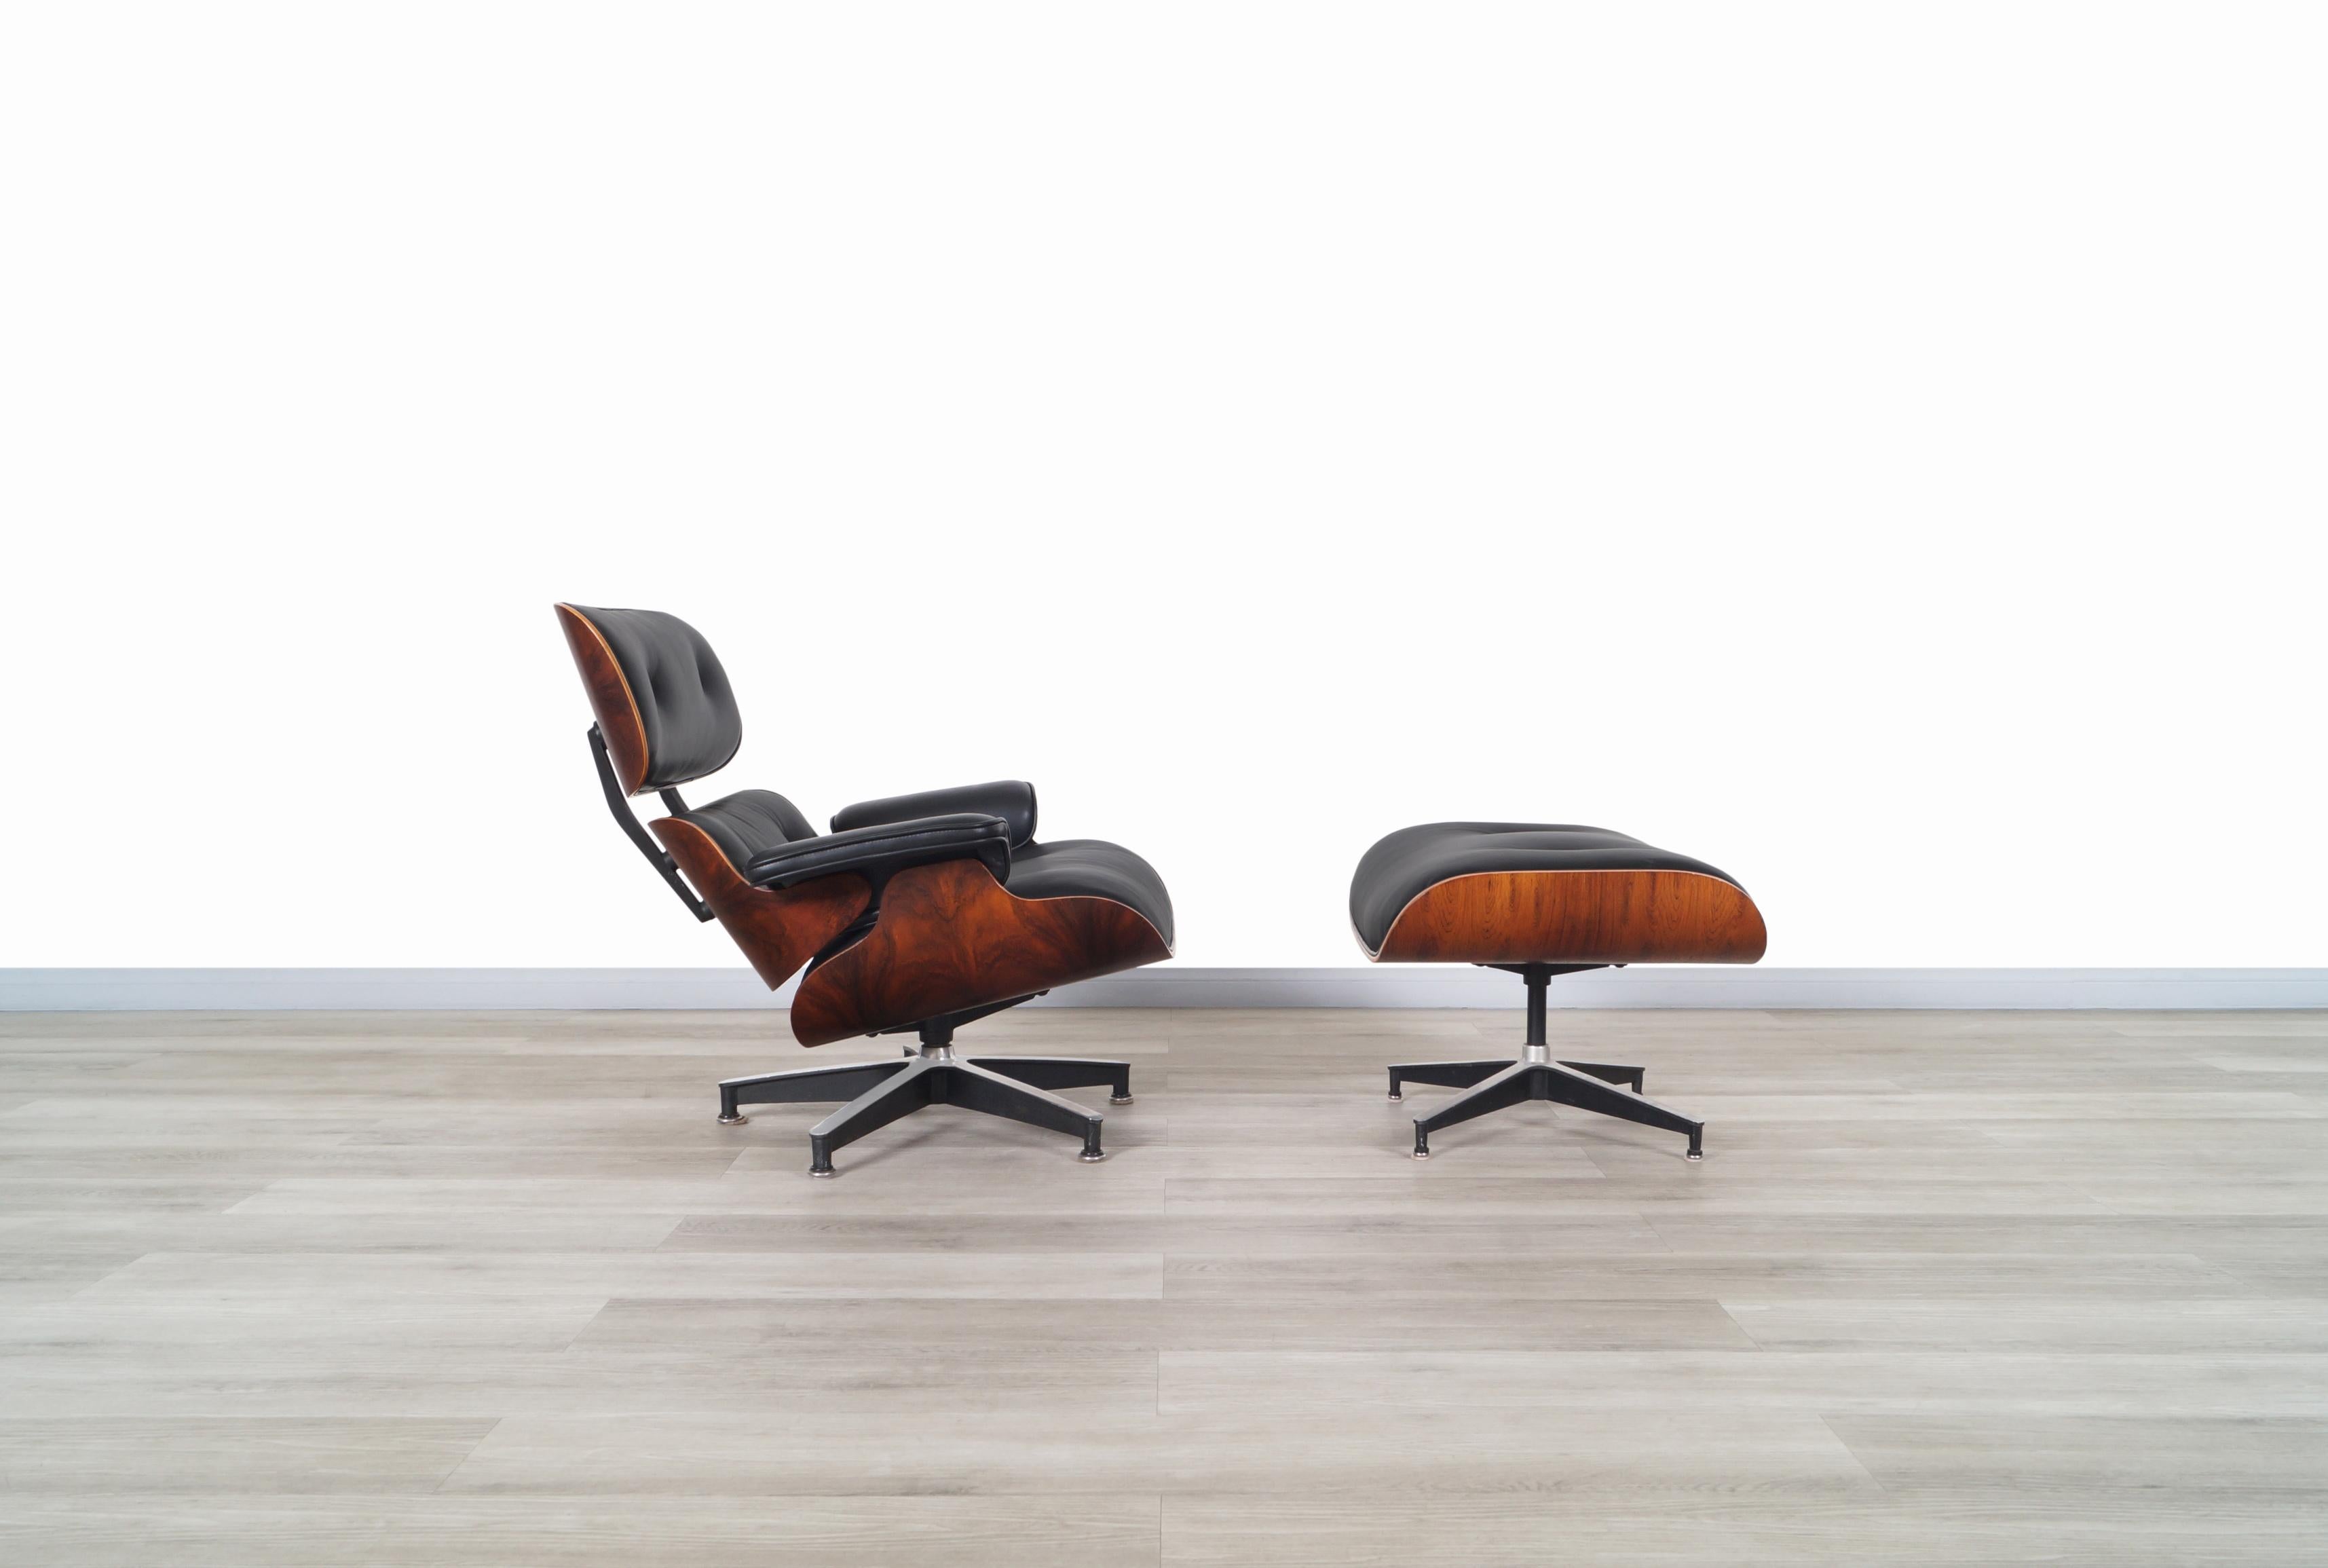 American Charles Eames Rosewood Lounge Chair and Ottoman by Herman Miller